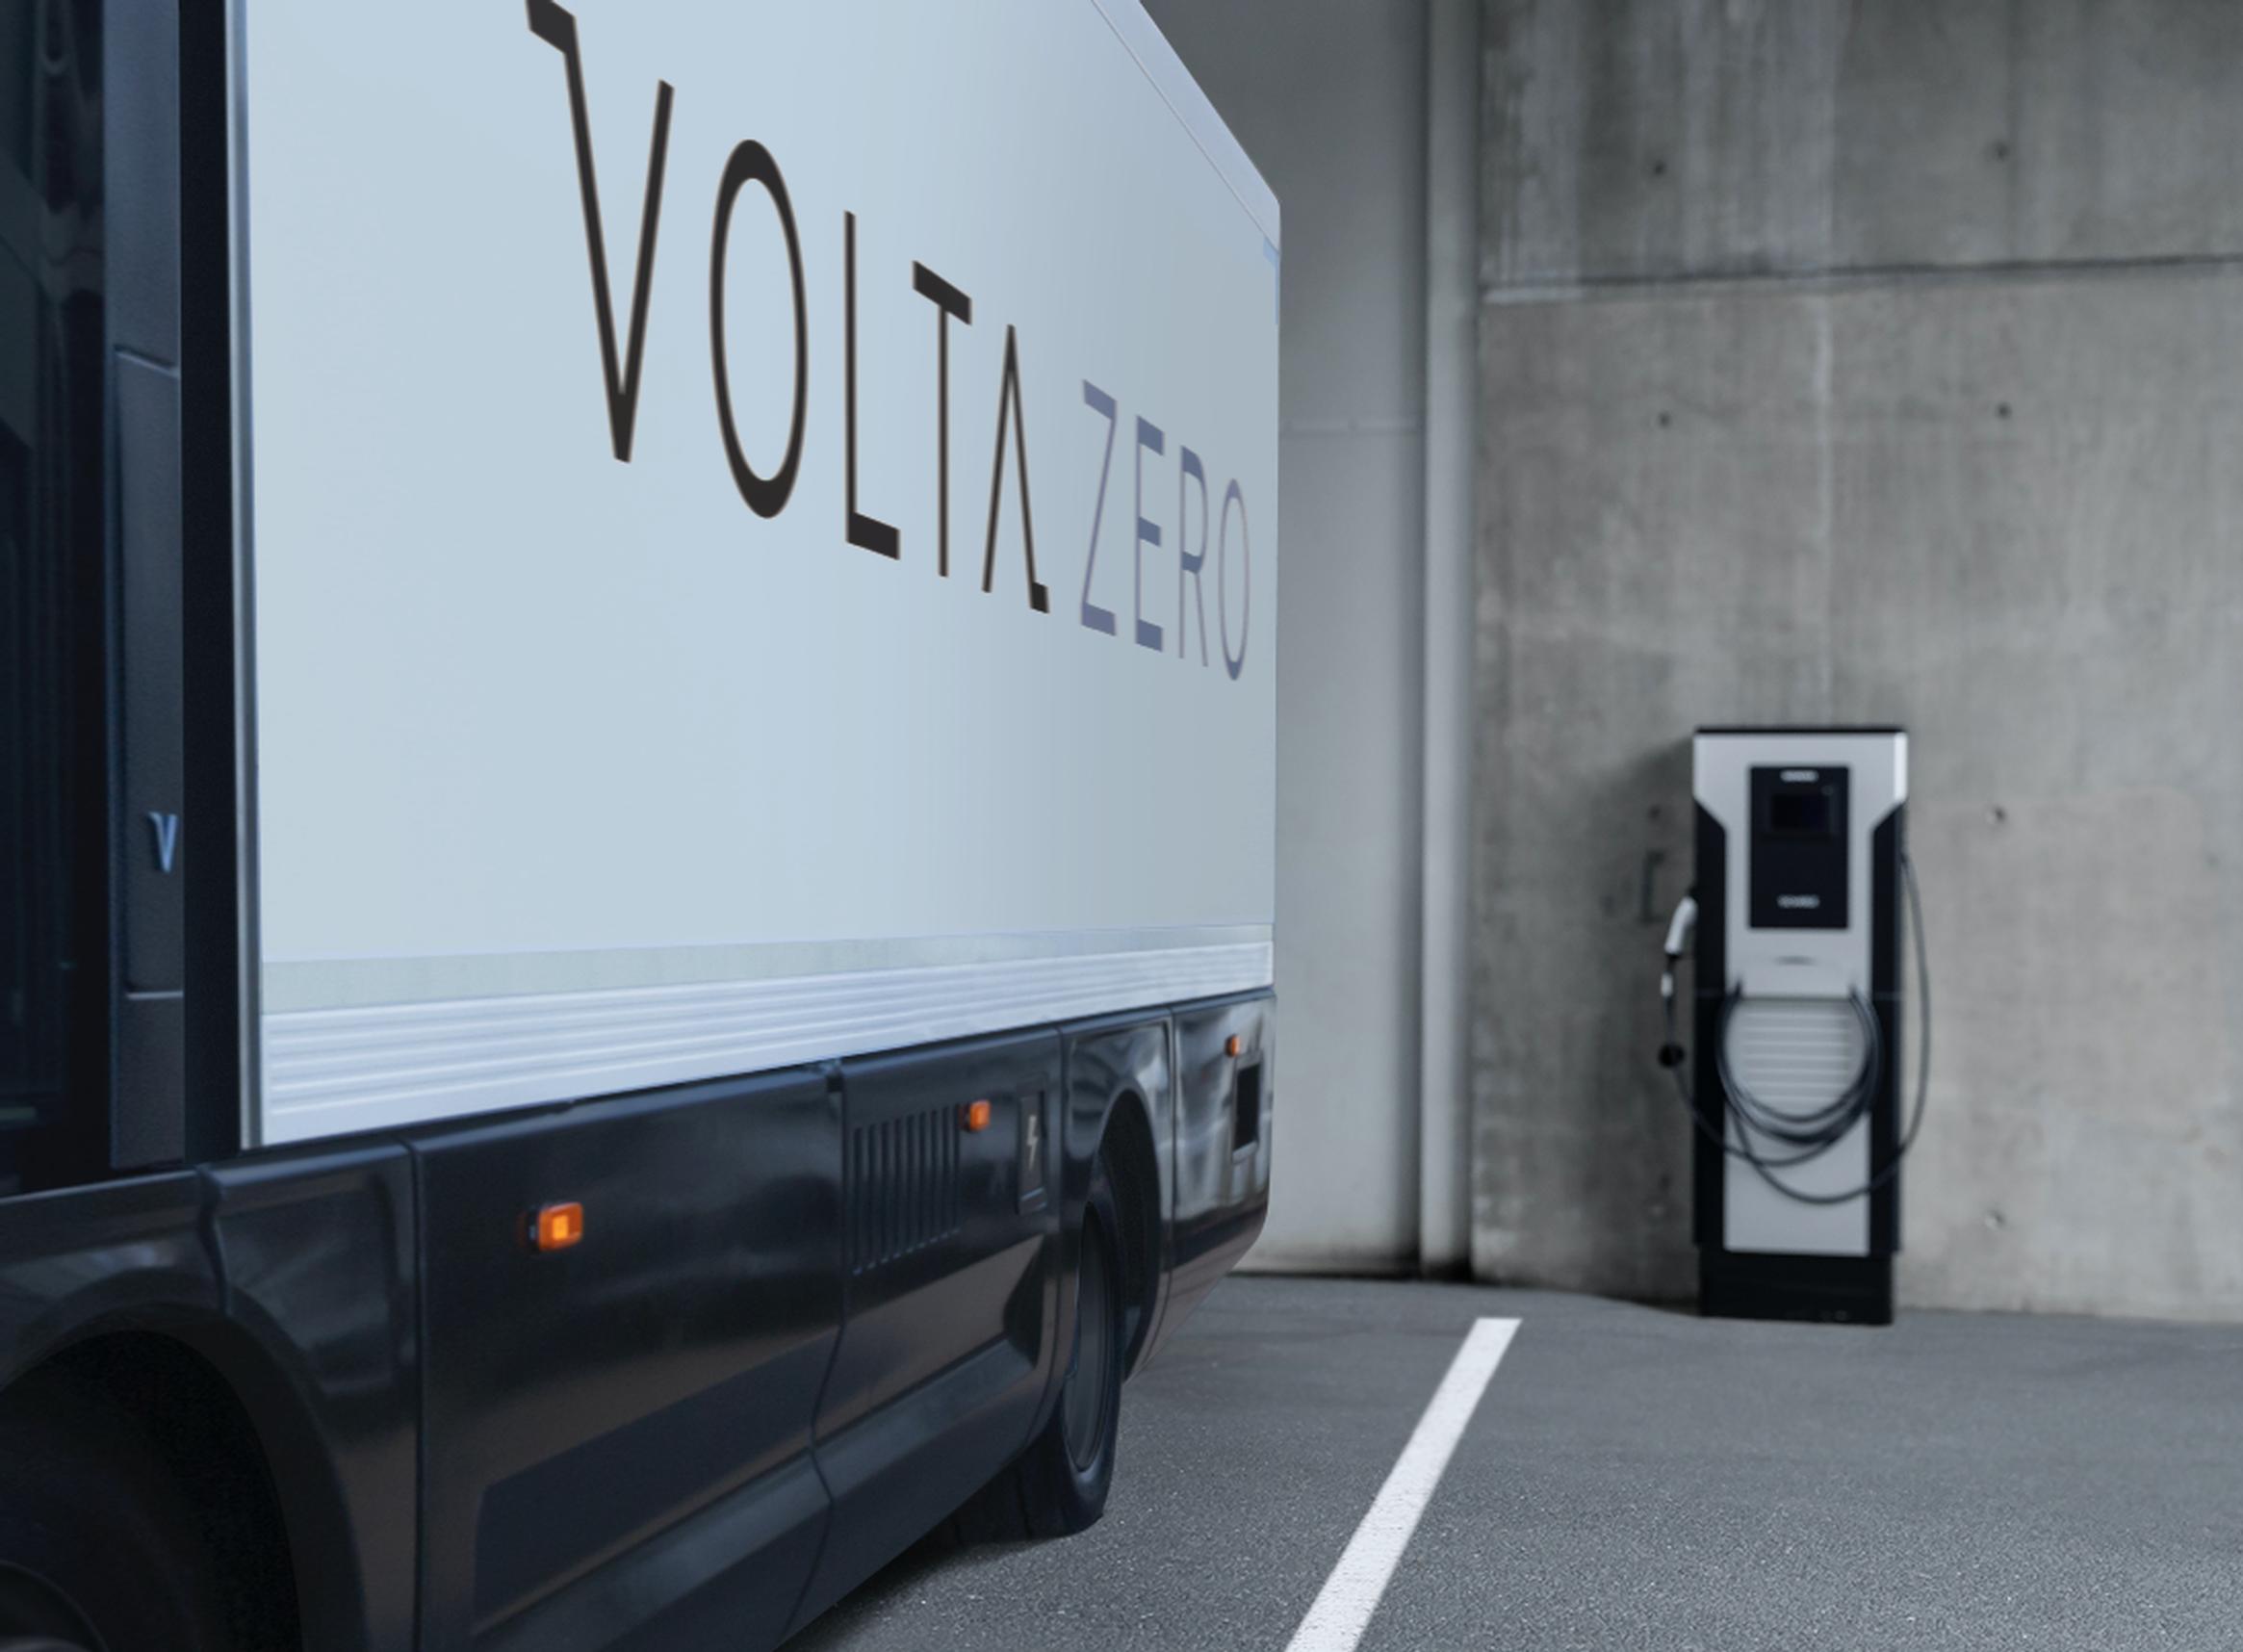 Volta Trucks and Siemens Smart Infrastructure have signed a letter of intent